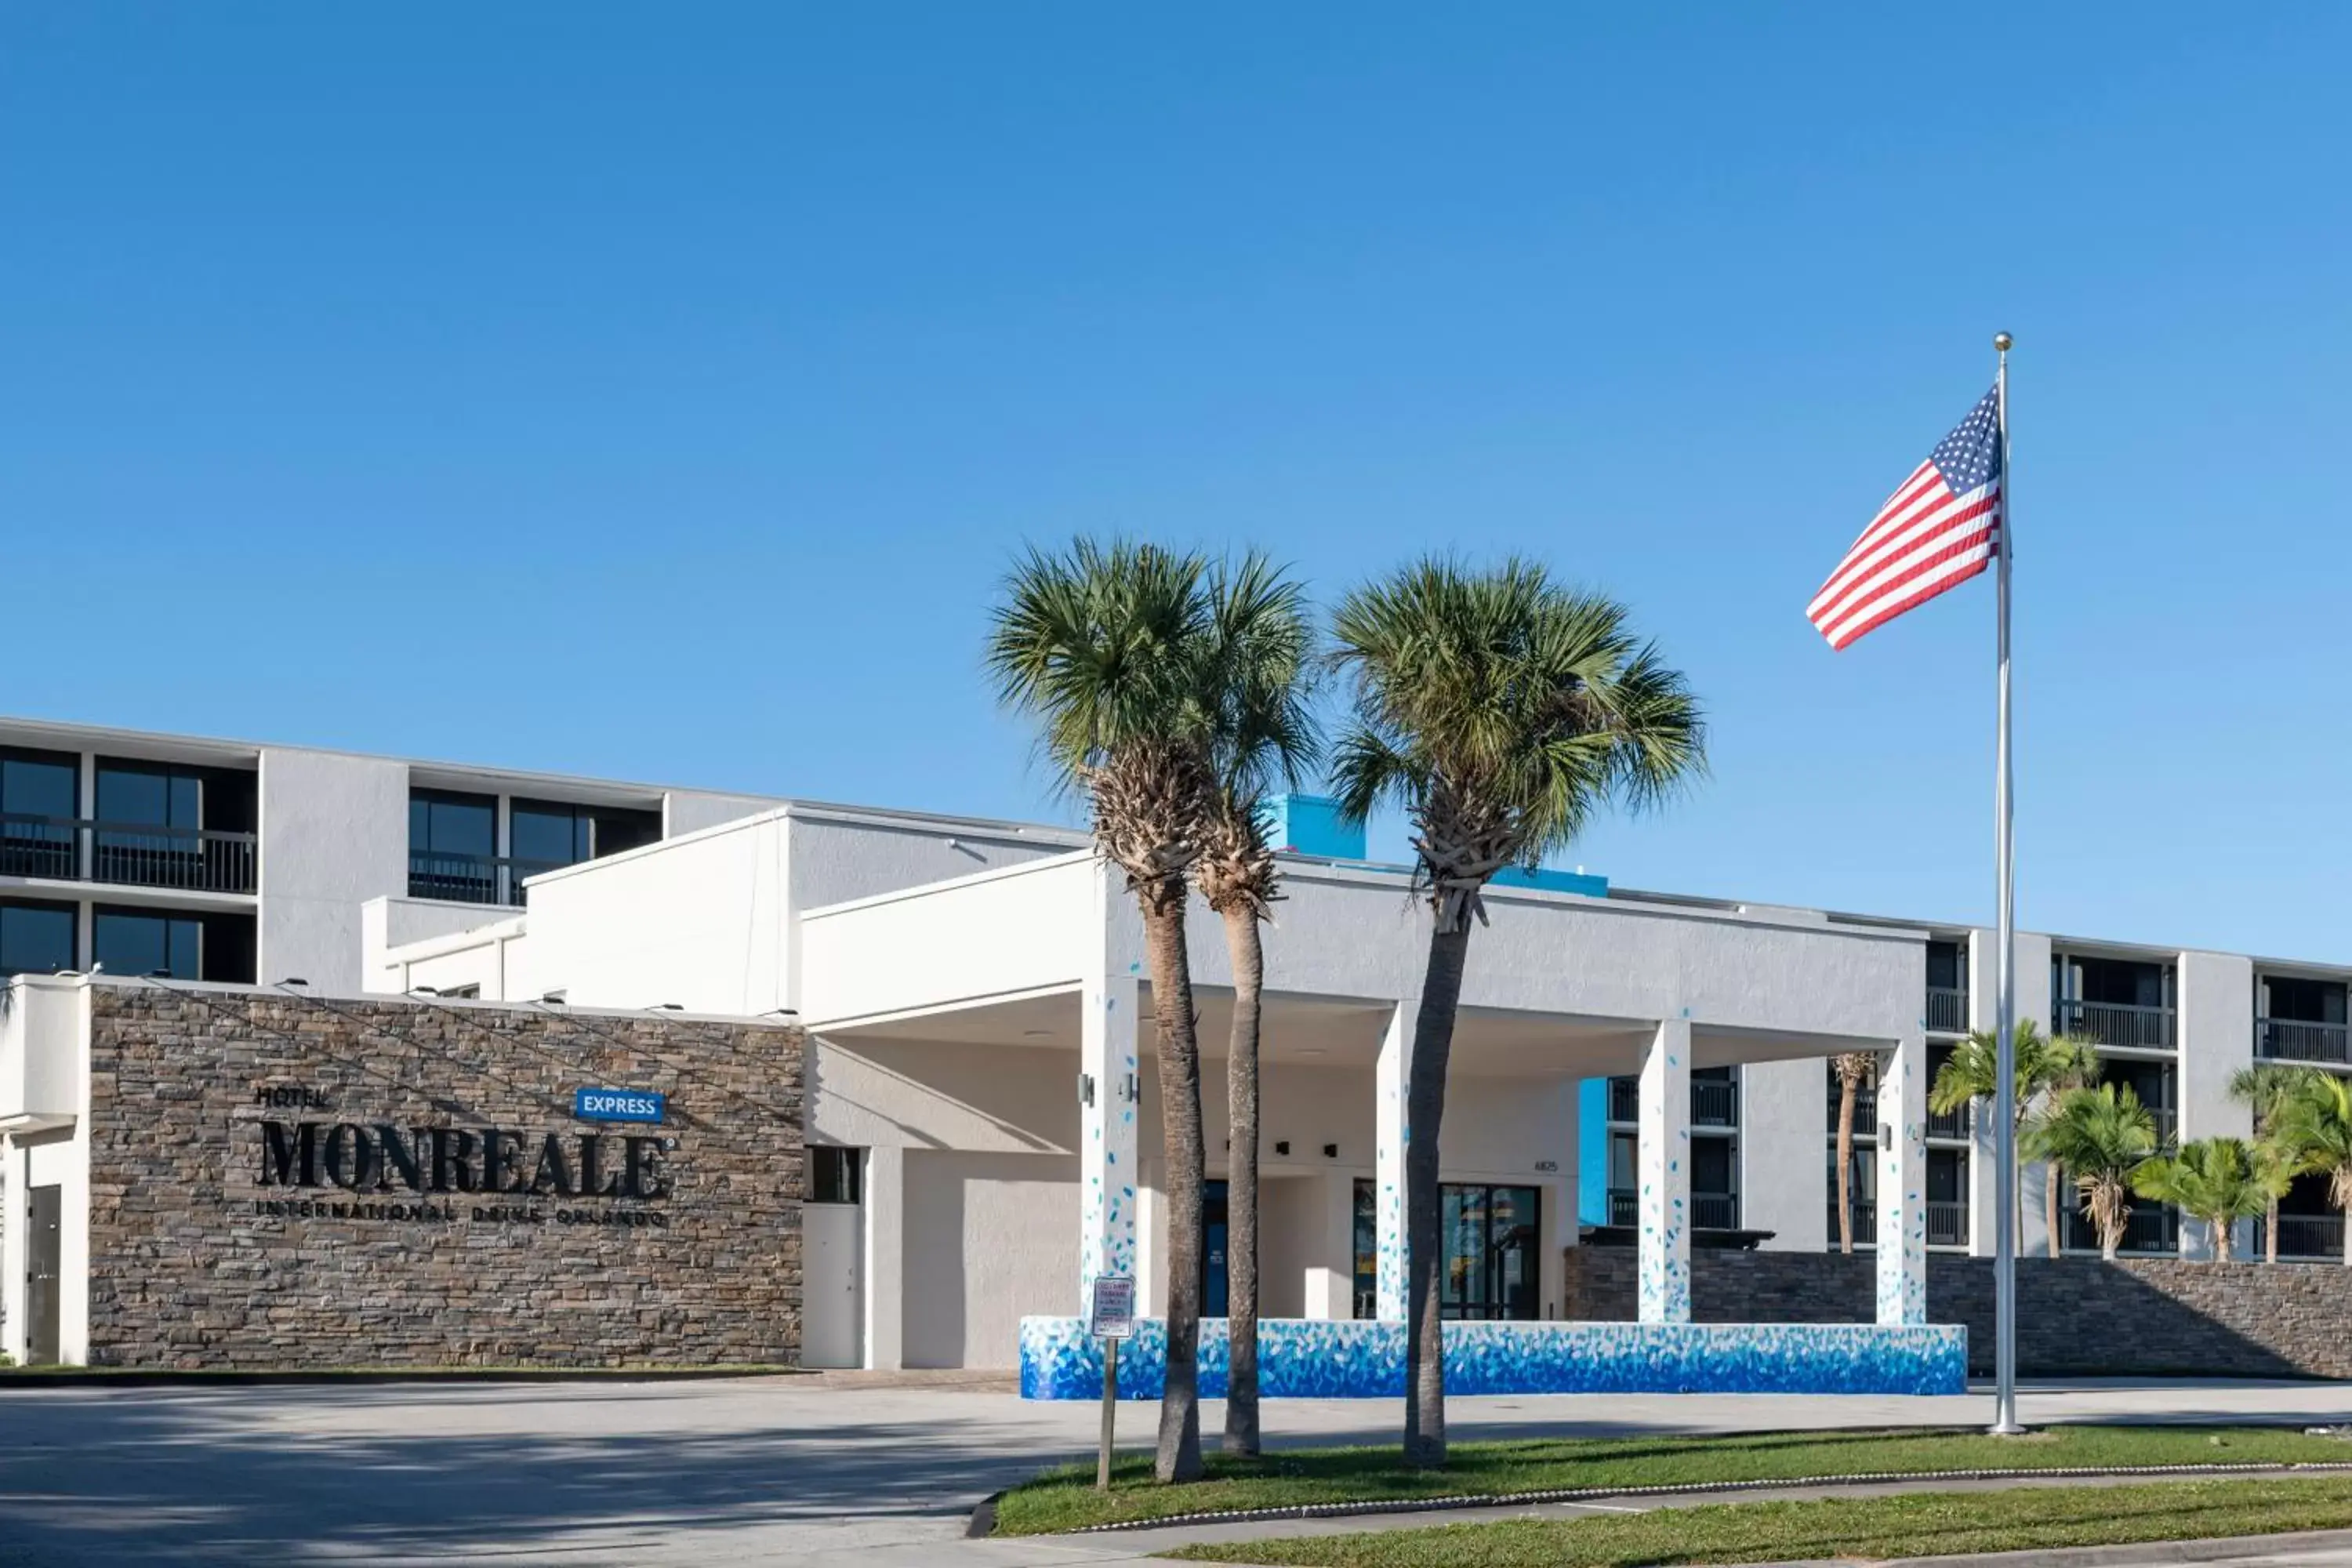 Property Building in Hotel Monreale Express International Drive Orlando